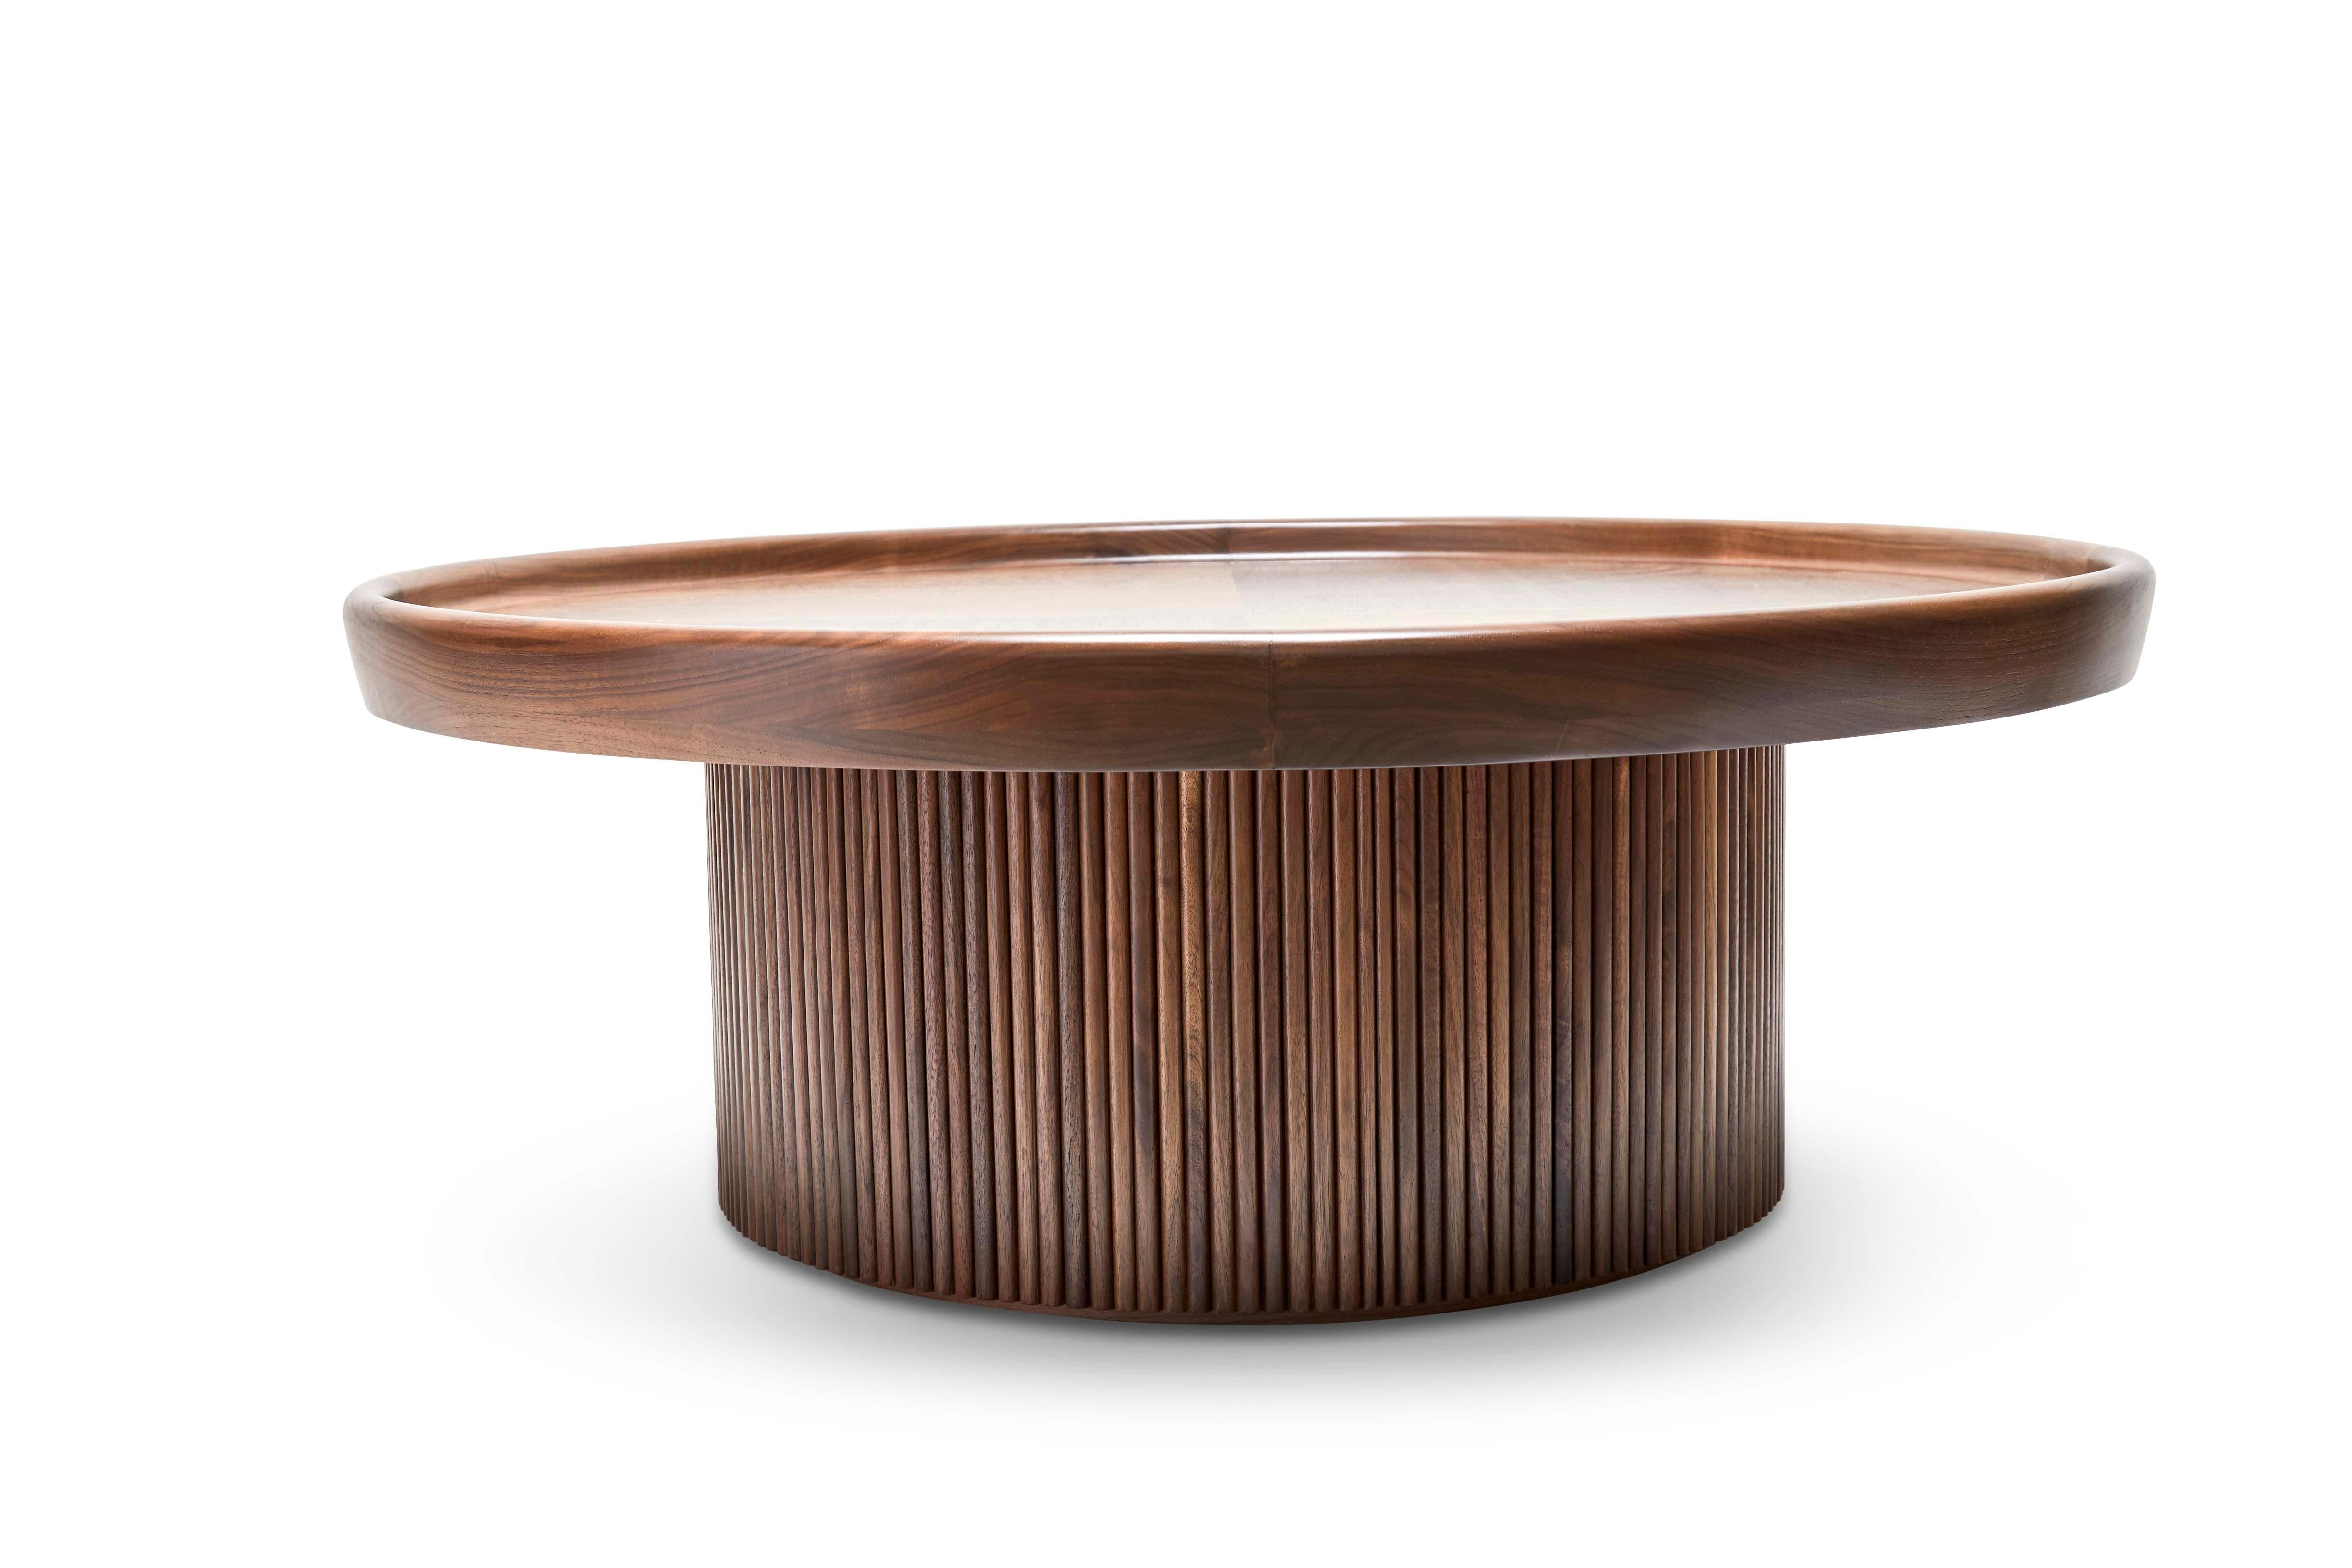 Walnut Ojai coffee table by Lawson-Fenning. The Ojai coffee table features a round top with marquetry and a drum-shaped base with tambour details. Available in American walnut or white oak. 

The Lawson-Fenning Collection is designed and hand made